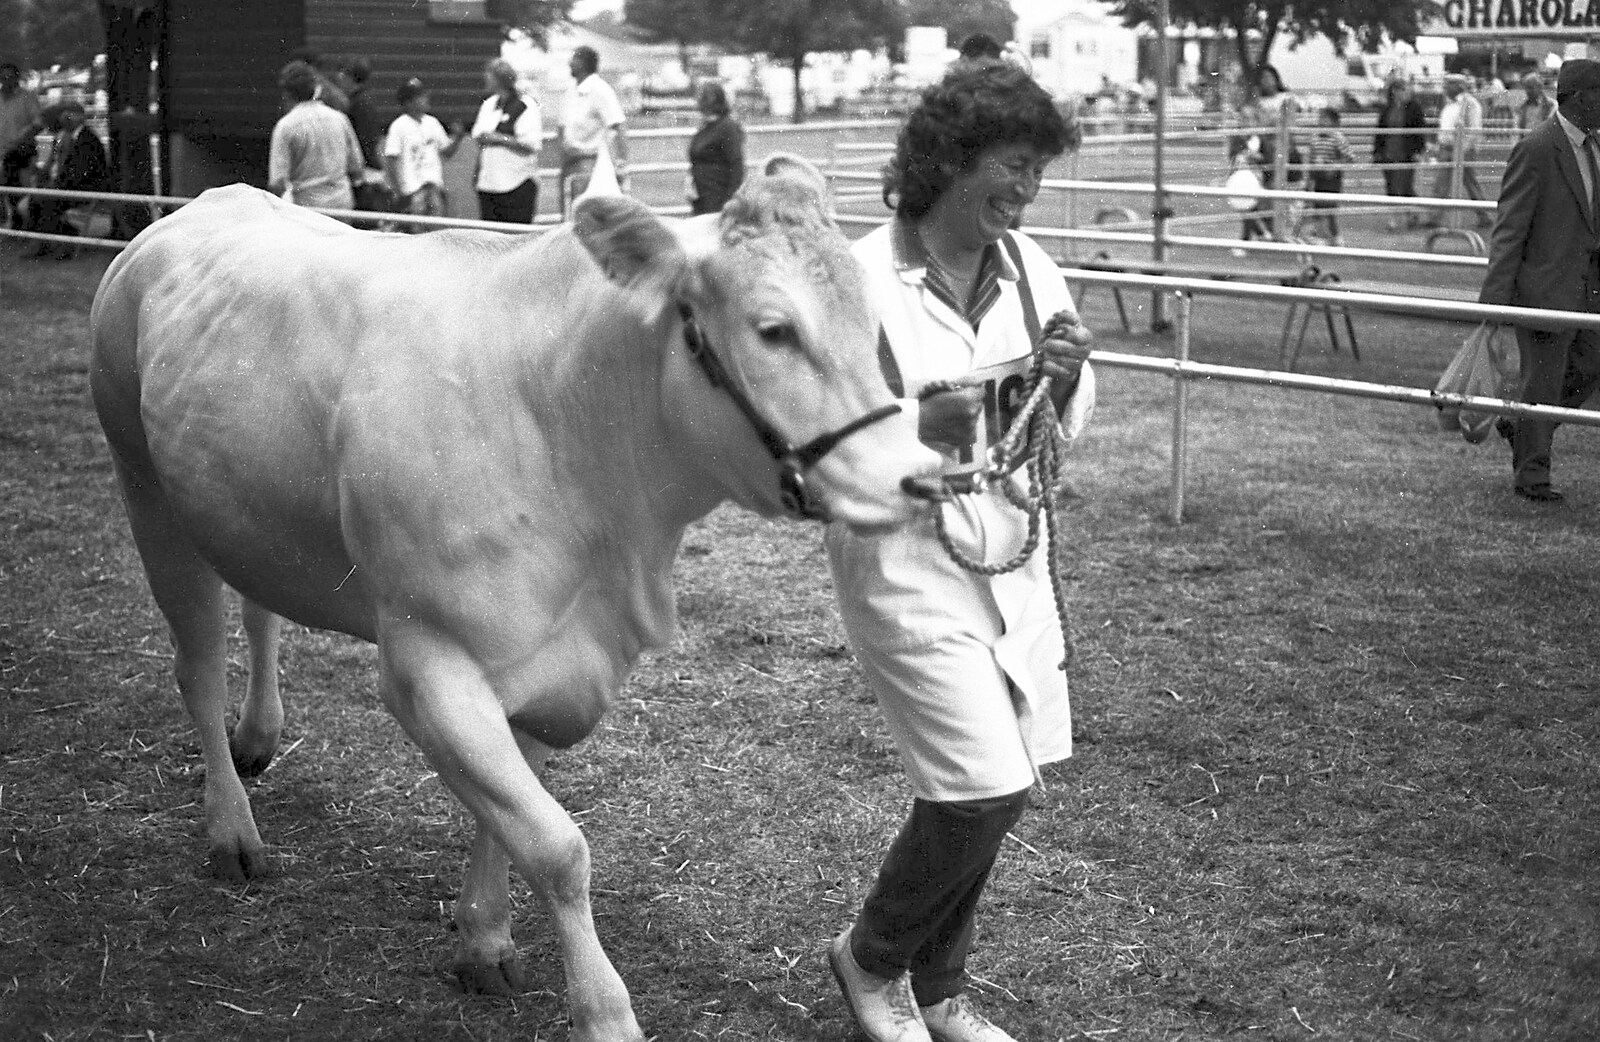 The Royal Norfolk Show, Costessey, Norwich - June 20th 1994: A cow goes for a walk